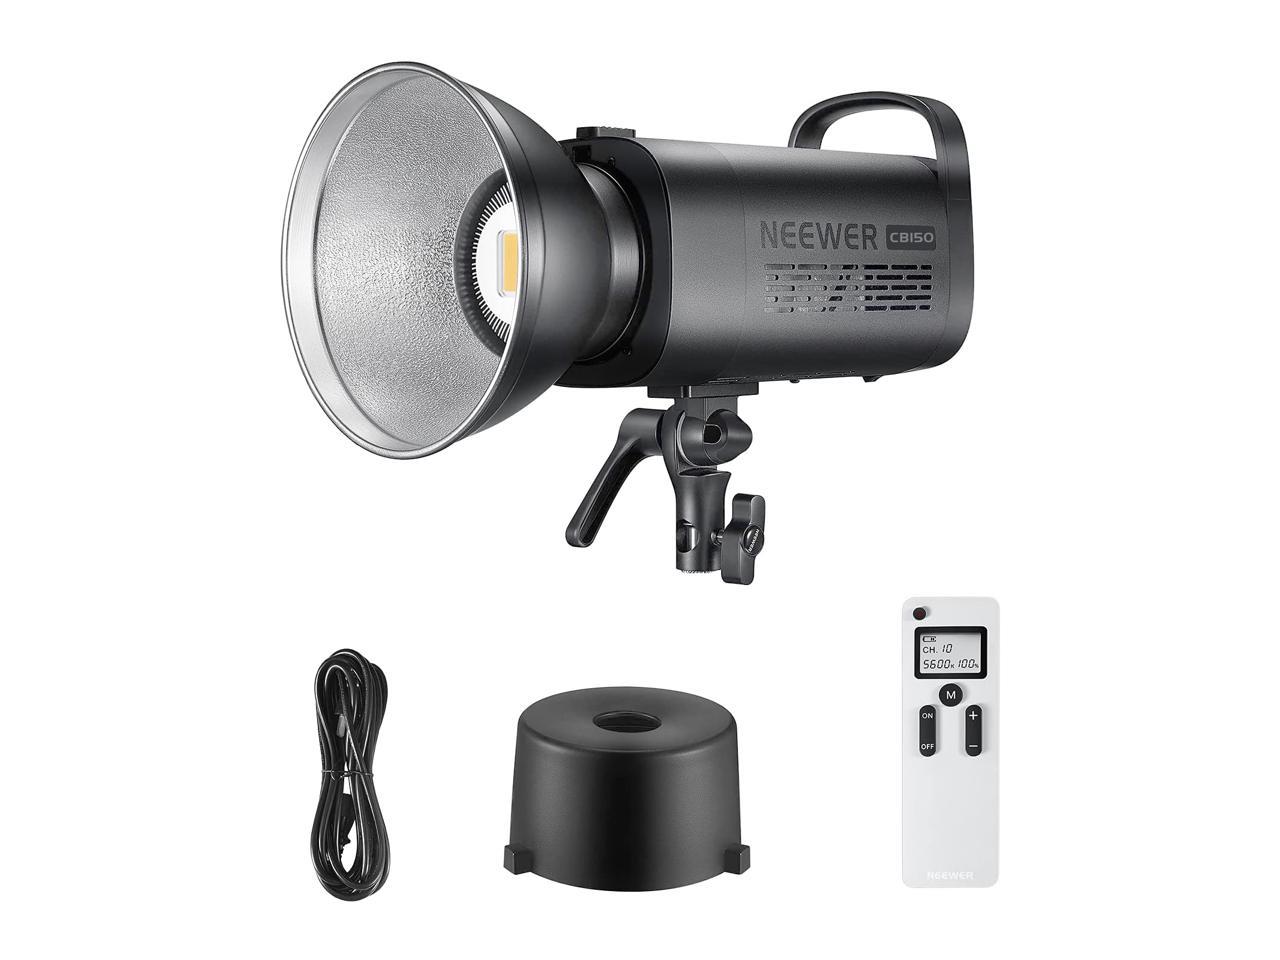 Neewer CB150 150W LED Video Light,Continuous LED Lighting with 5600K  Daylight,CRI 97+,TLCI 97+,13000 Lux@1M,Bowens Mount and 2.4G Wireless  Remote for 